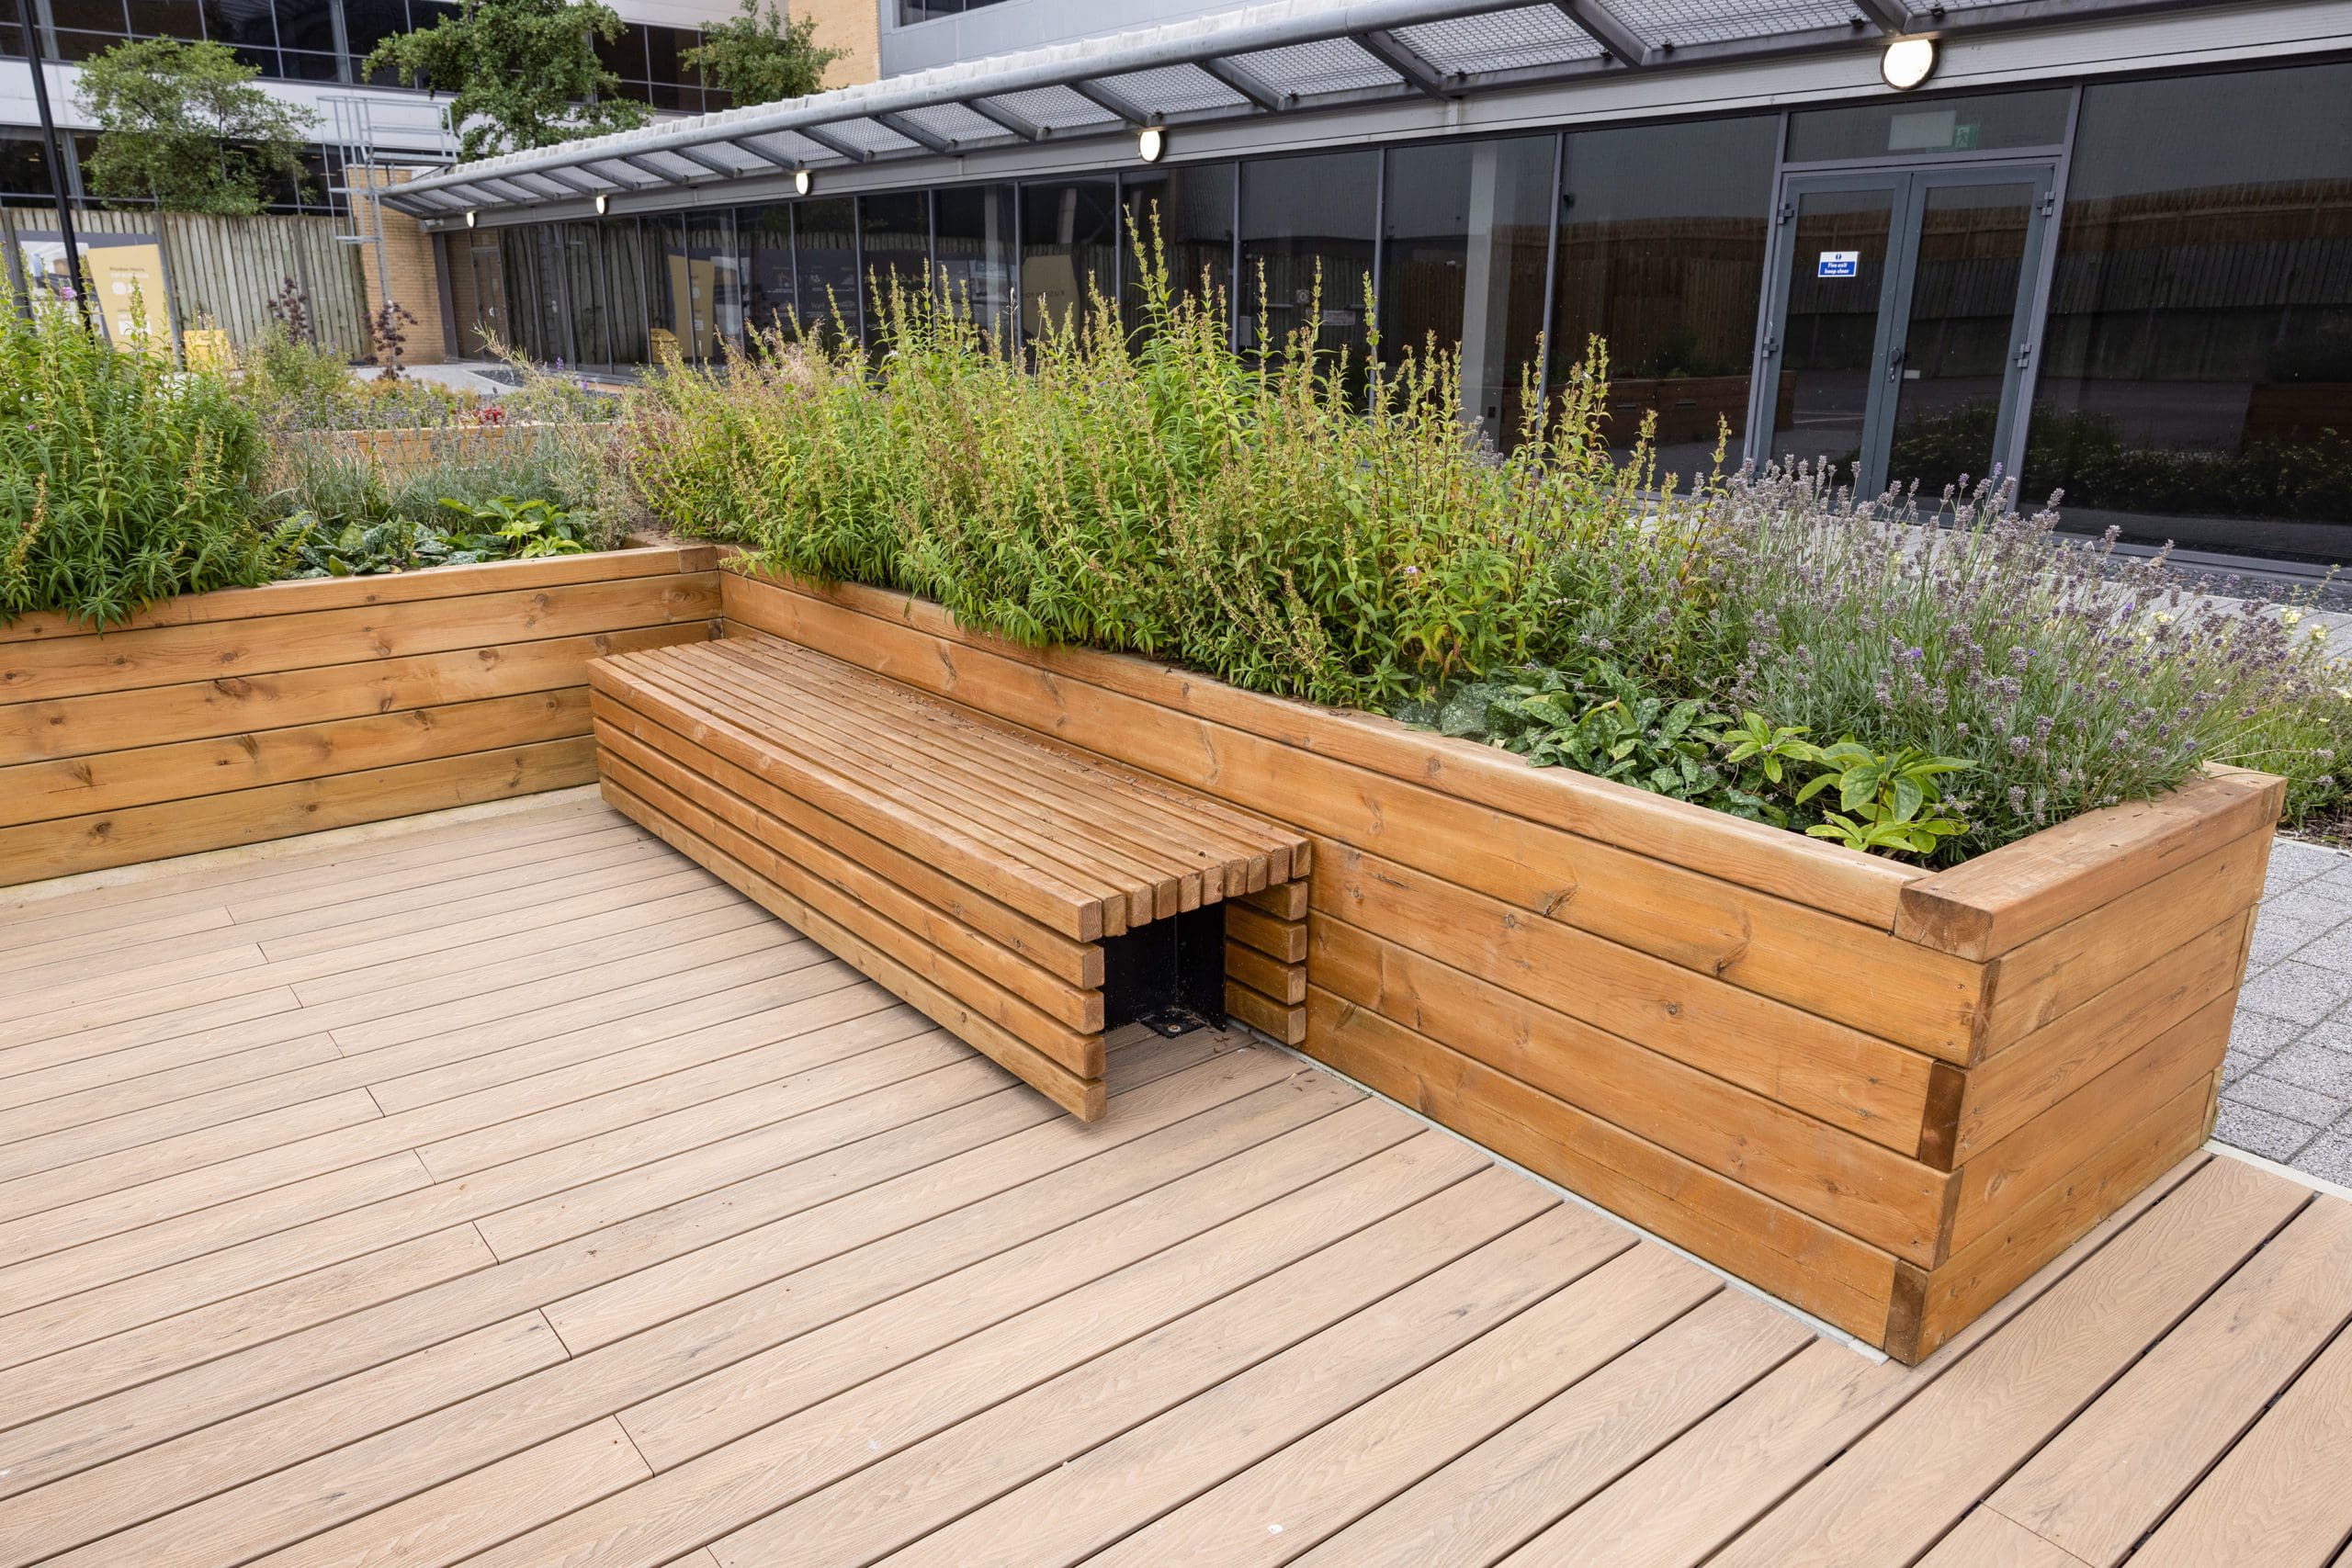 l-shaped-wooden-raised-planters-with-wooden-bench-infront